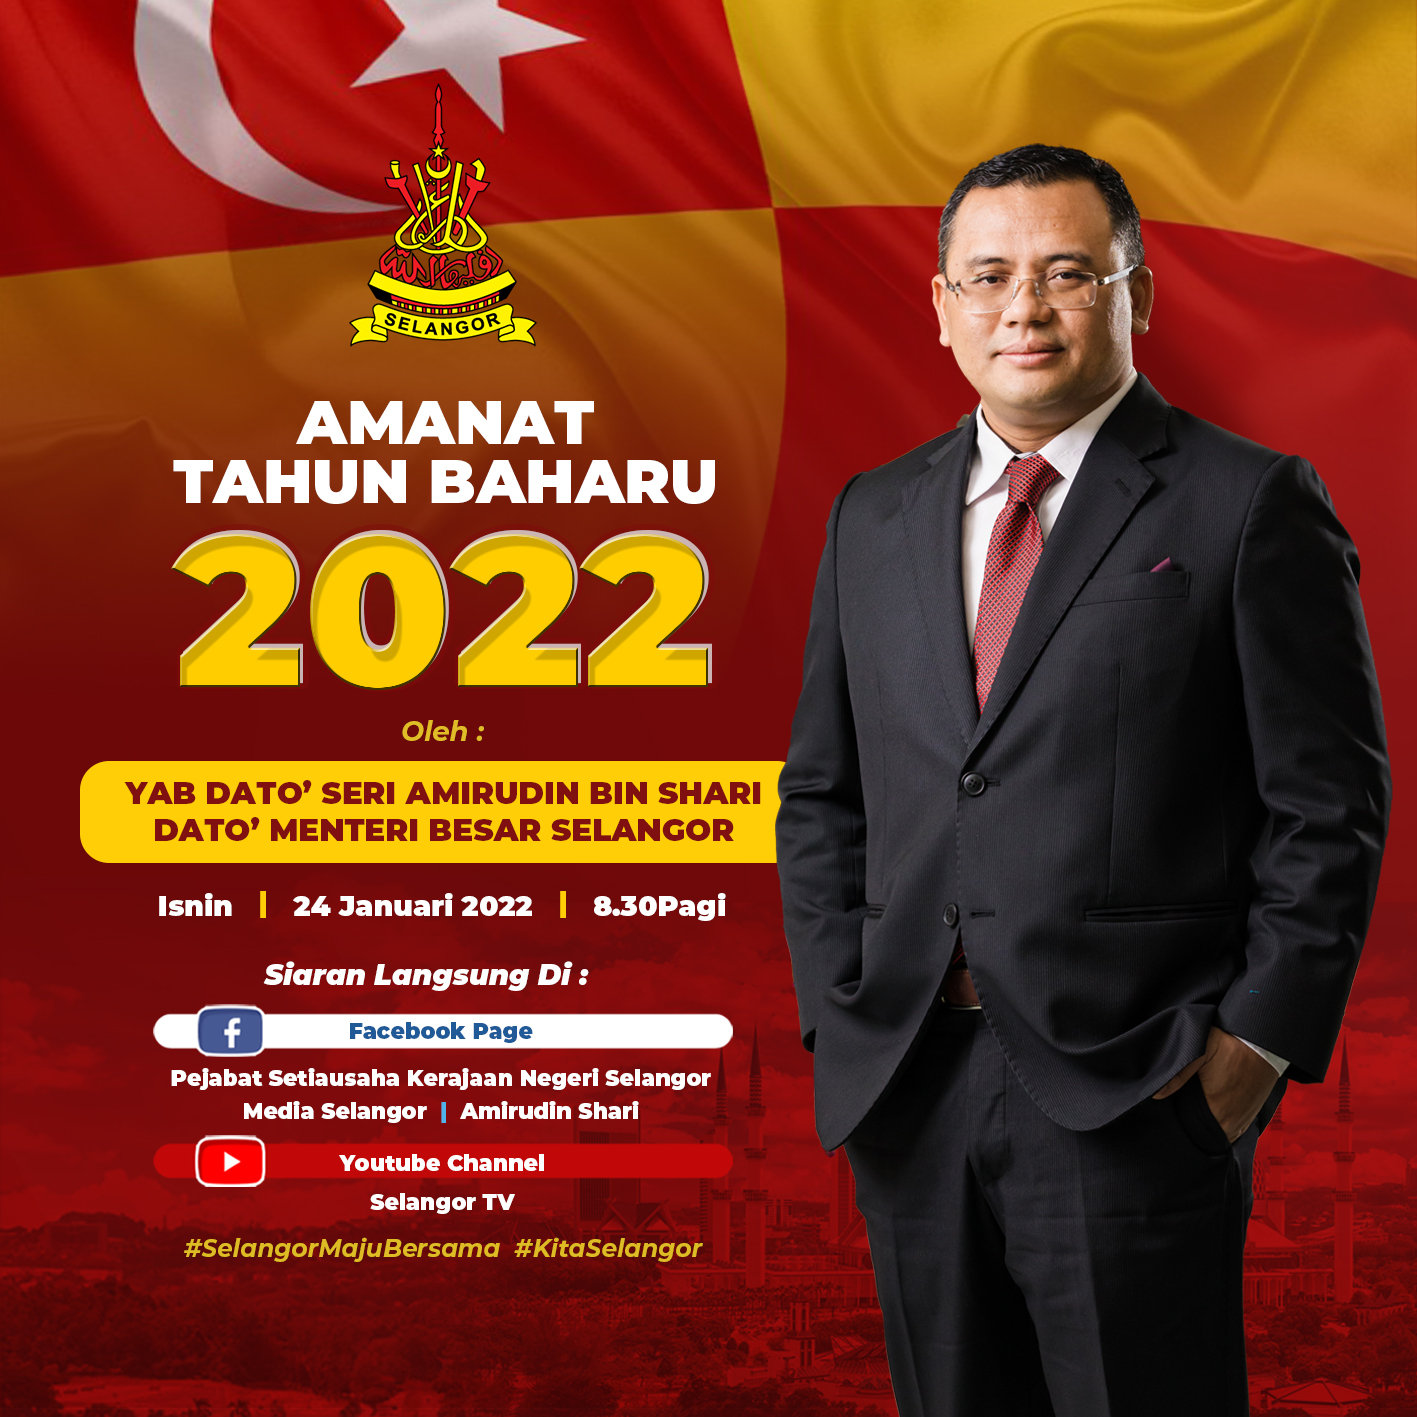 MB to deliver New Year’s message on Monday - Selangor Journal